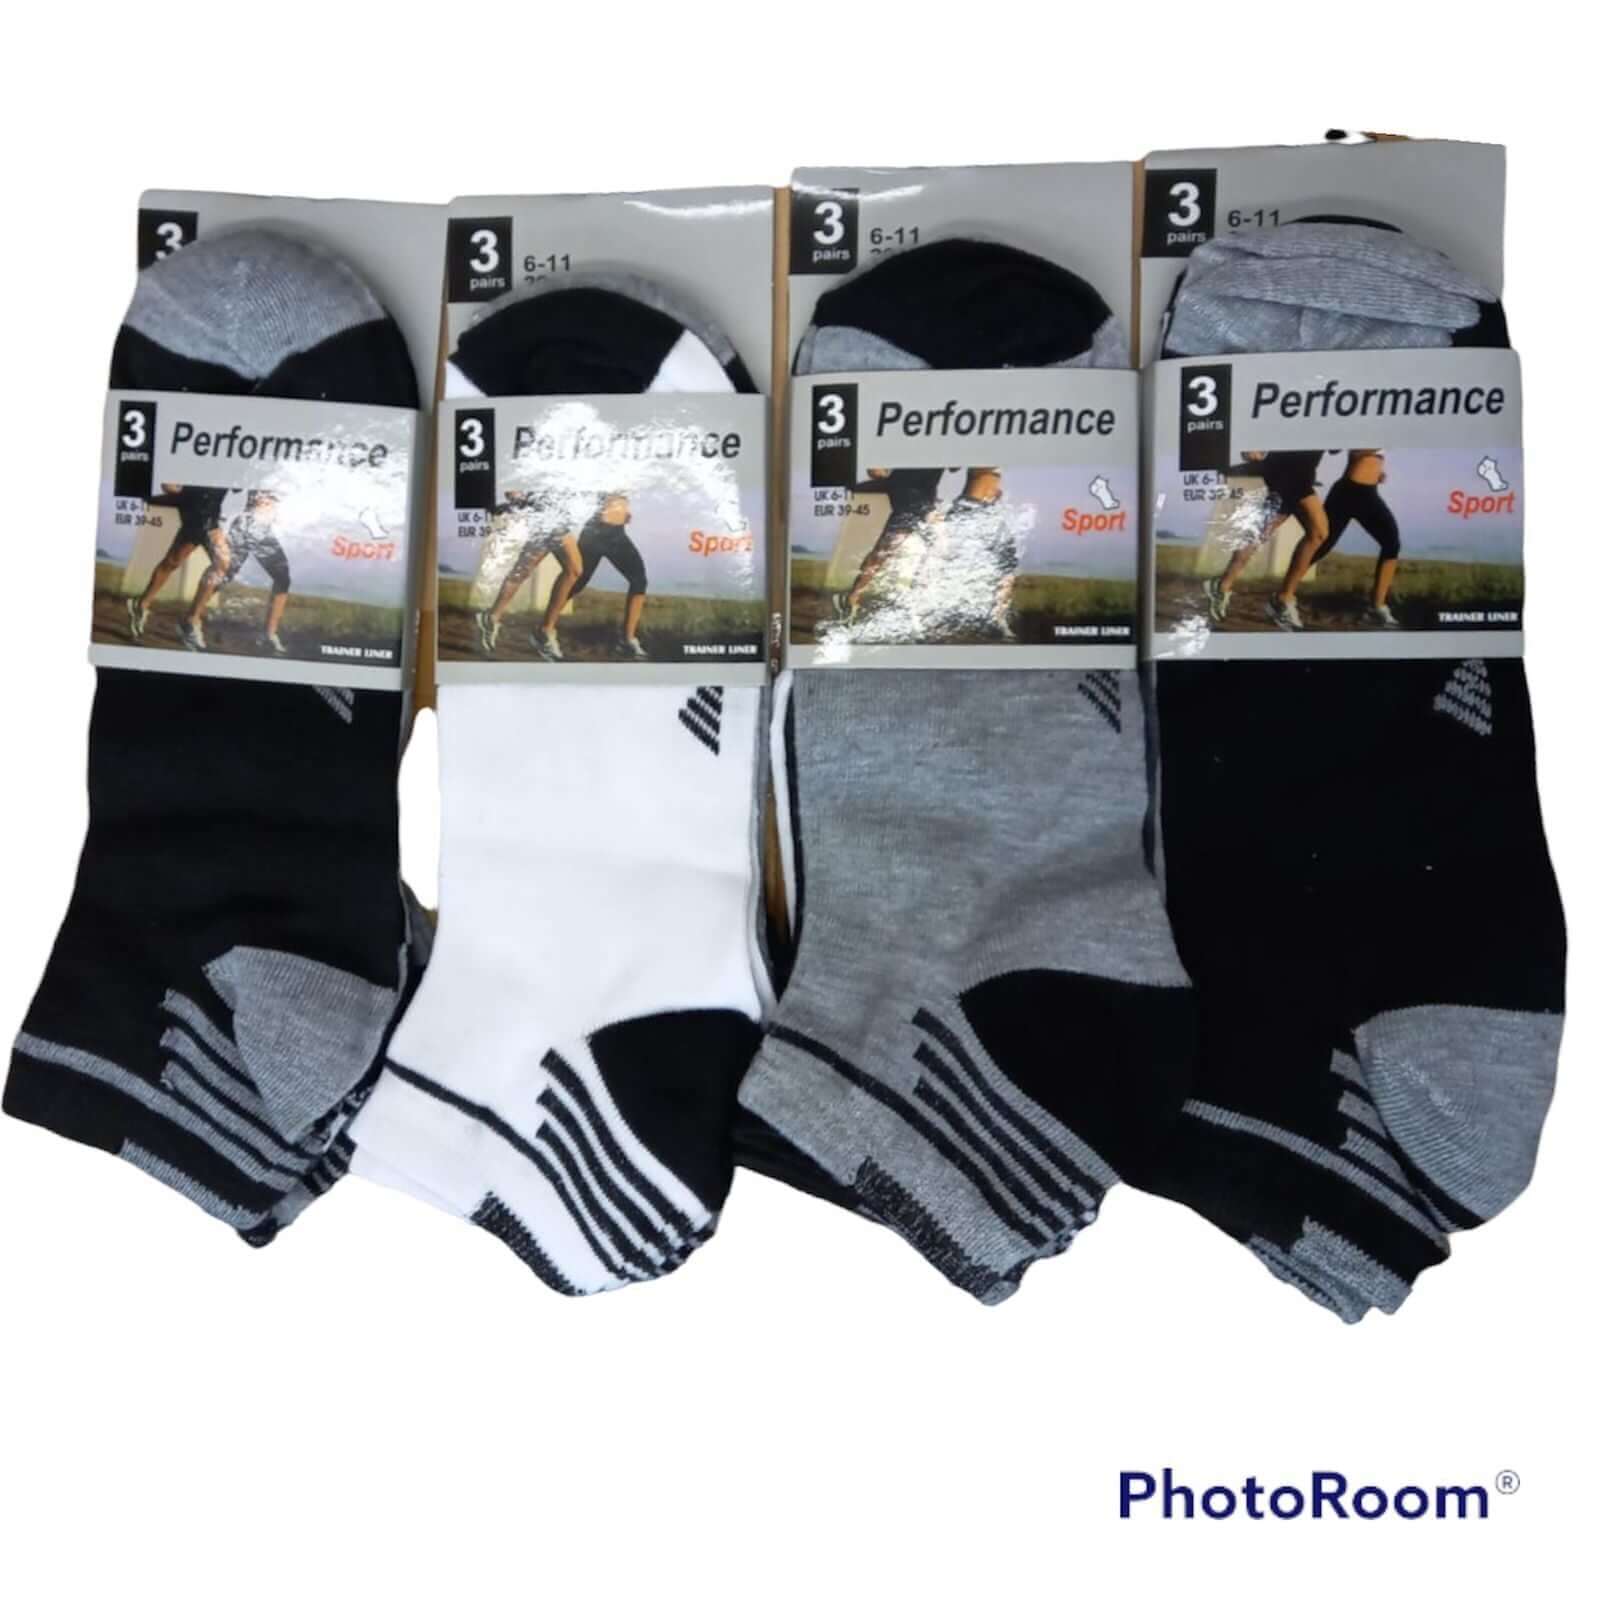 12 Pairs Men's Durable Trainer Liner Sport Performance Cotton Socks Si

*{height:100%;width:100%;display:inline-block;background-size:contain;background-repeat:no-repeat;background-position:50%}.content__gallery .thumb__float{display:i